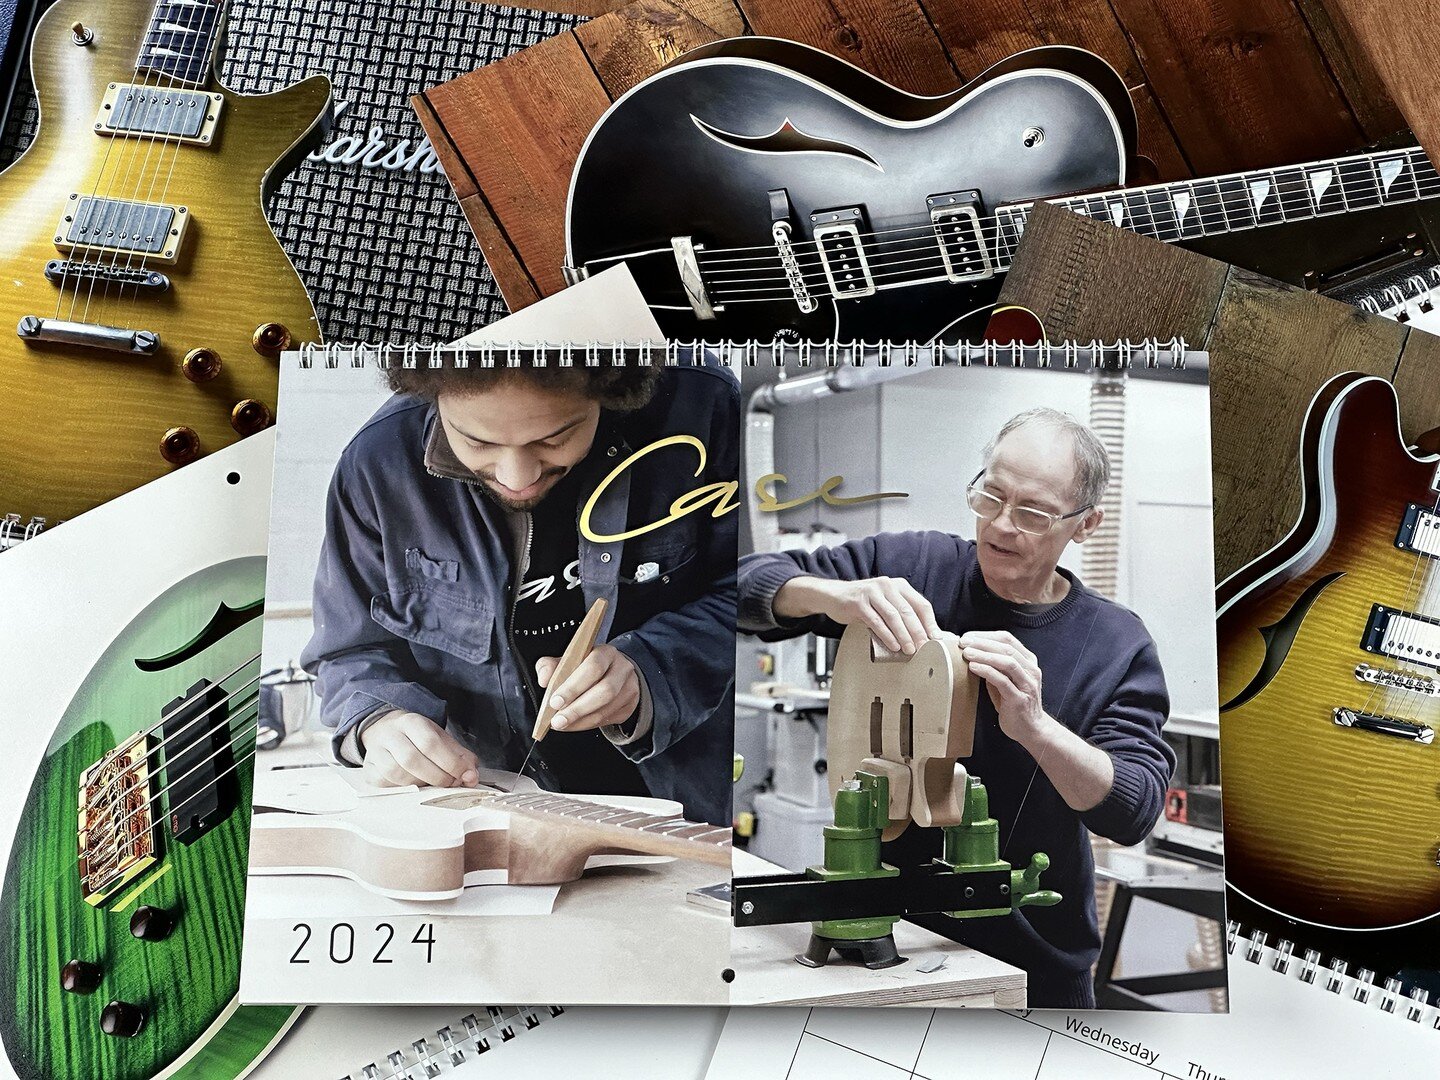 Case Guitars calendars have arrived!
Our deluxe, 2024 wall calendar has 12 rich guitar images and spacious date grids (Opens to 28x44cm) printed on premium glossy 300 gsm card.

&pound;15.00 including UK postage
If you would like one, please contact: